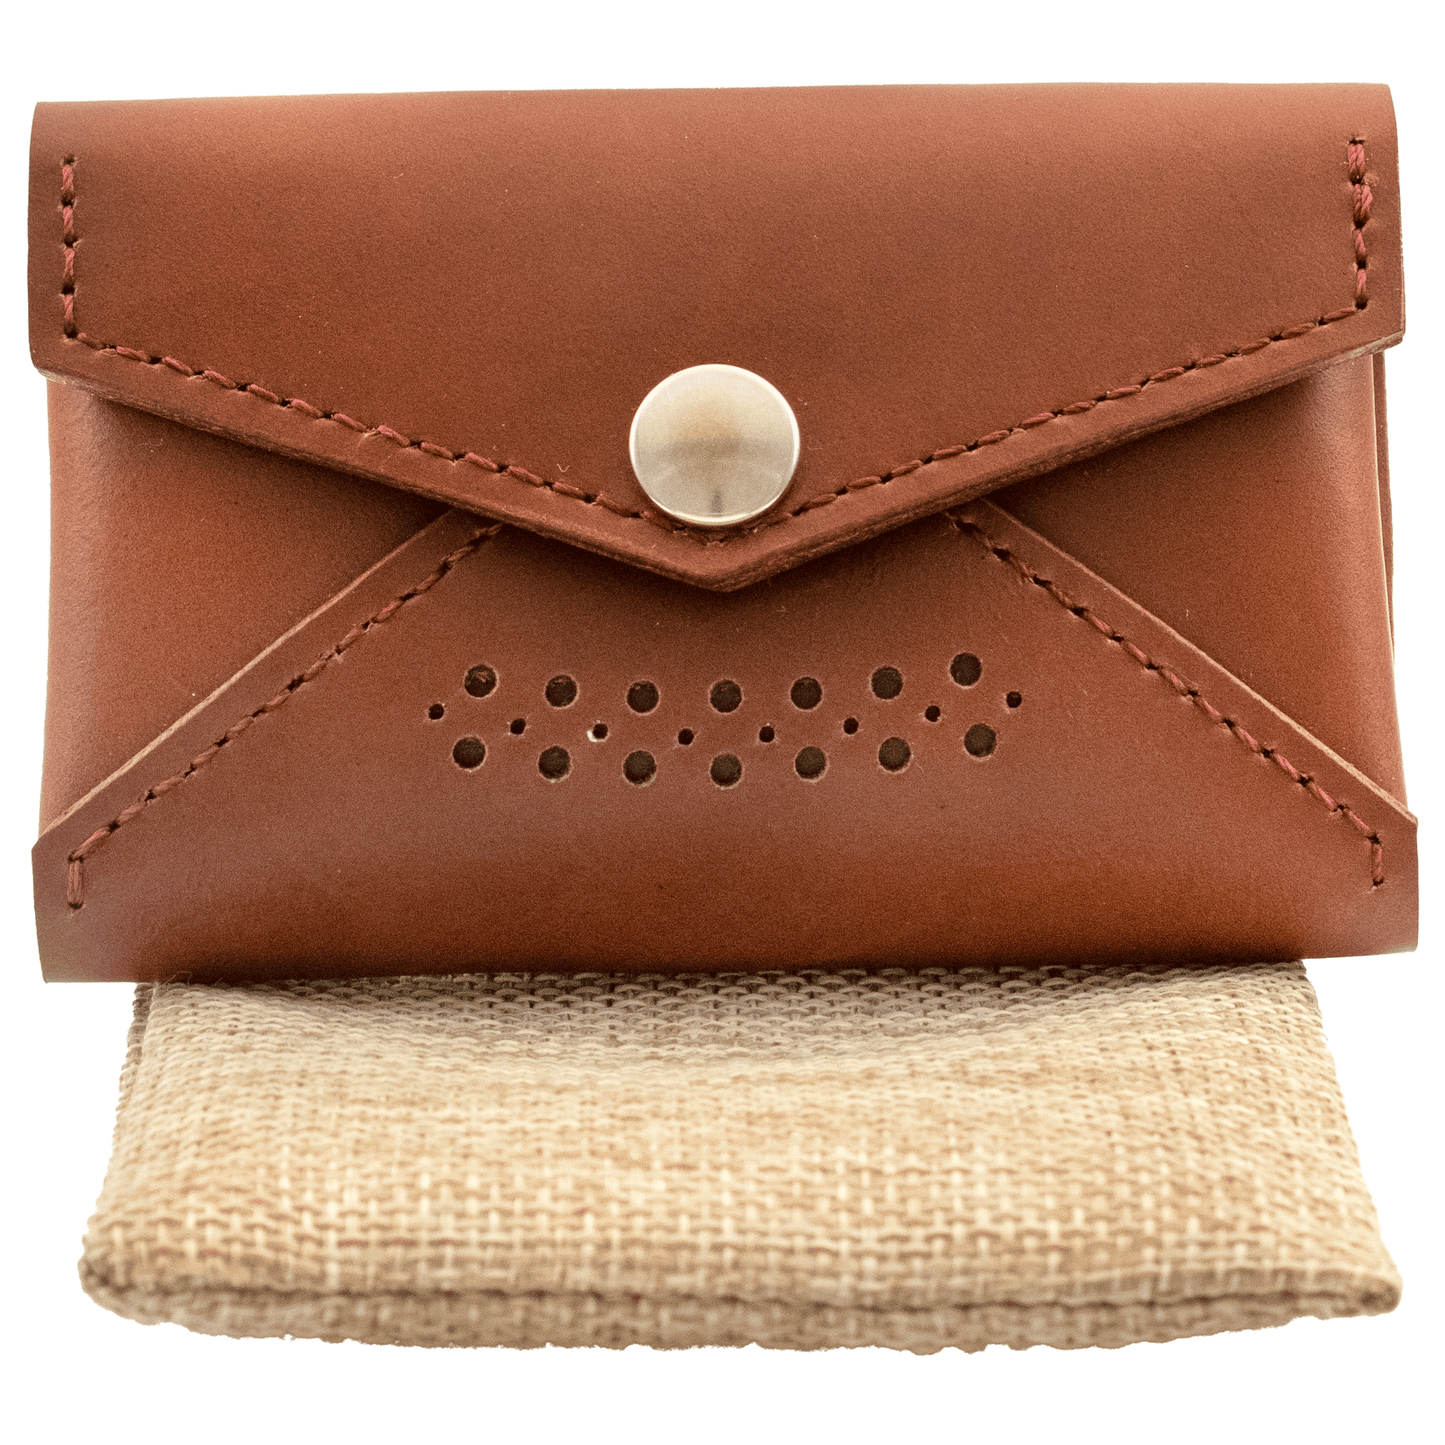 Handcrafted Leather Coin Purse with Punch Patter Design